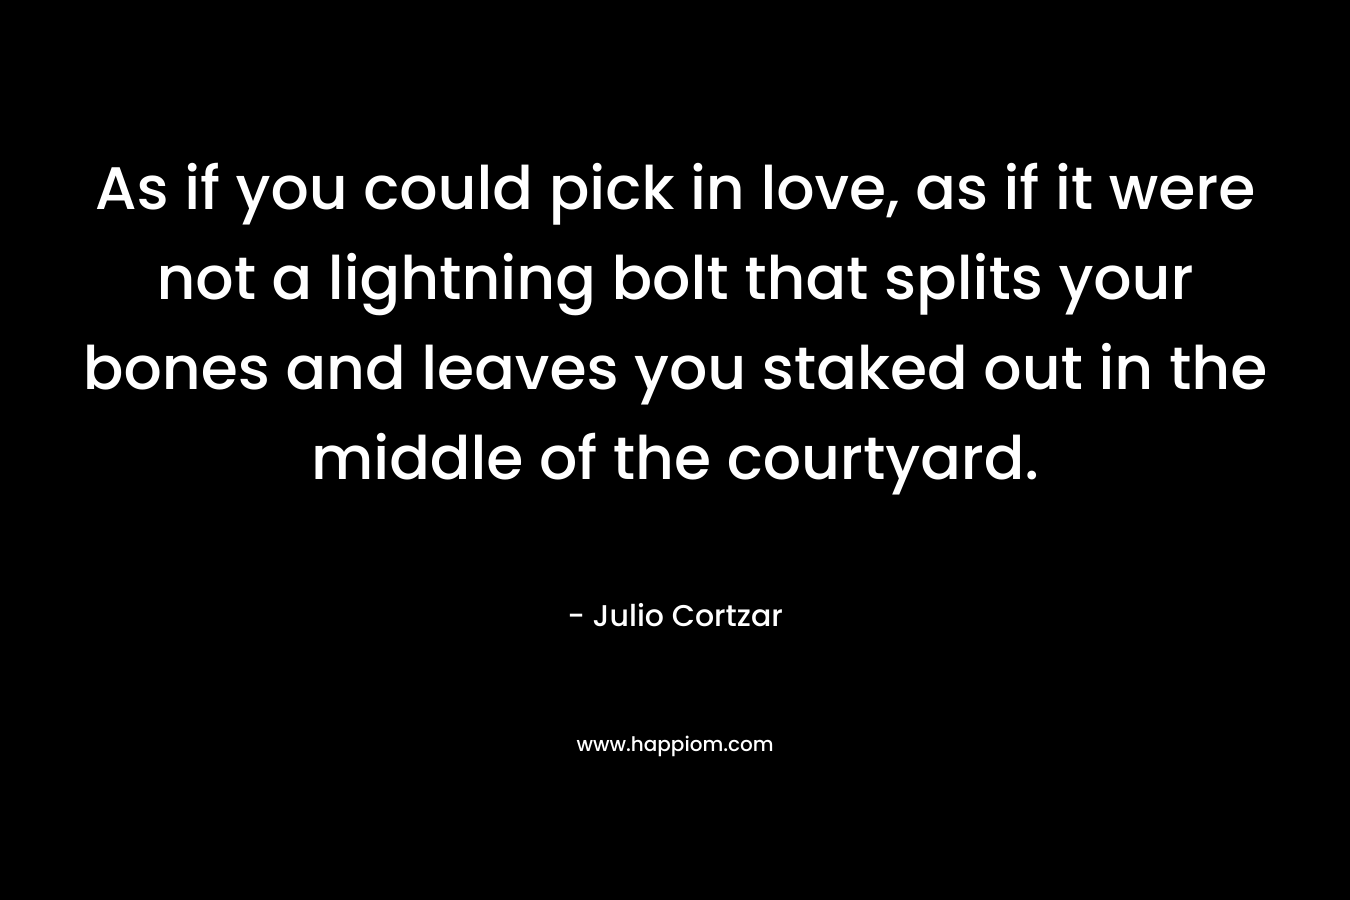 As if you could pick in love, as if it were not a lightning bolt that splits your bones and leaves you staked out in the middle of the courtyard. – Julio Cortzar